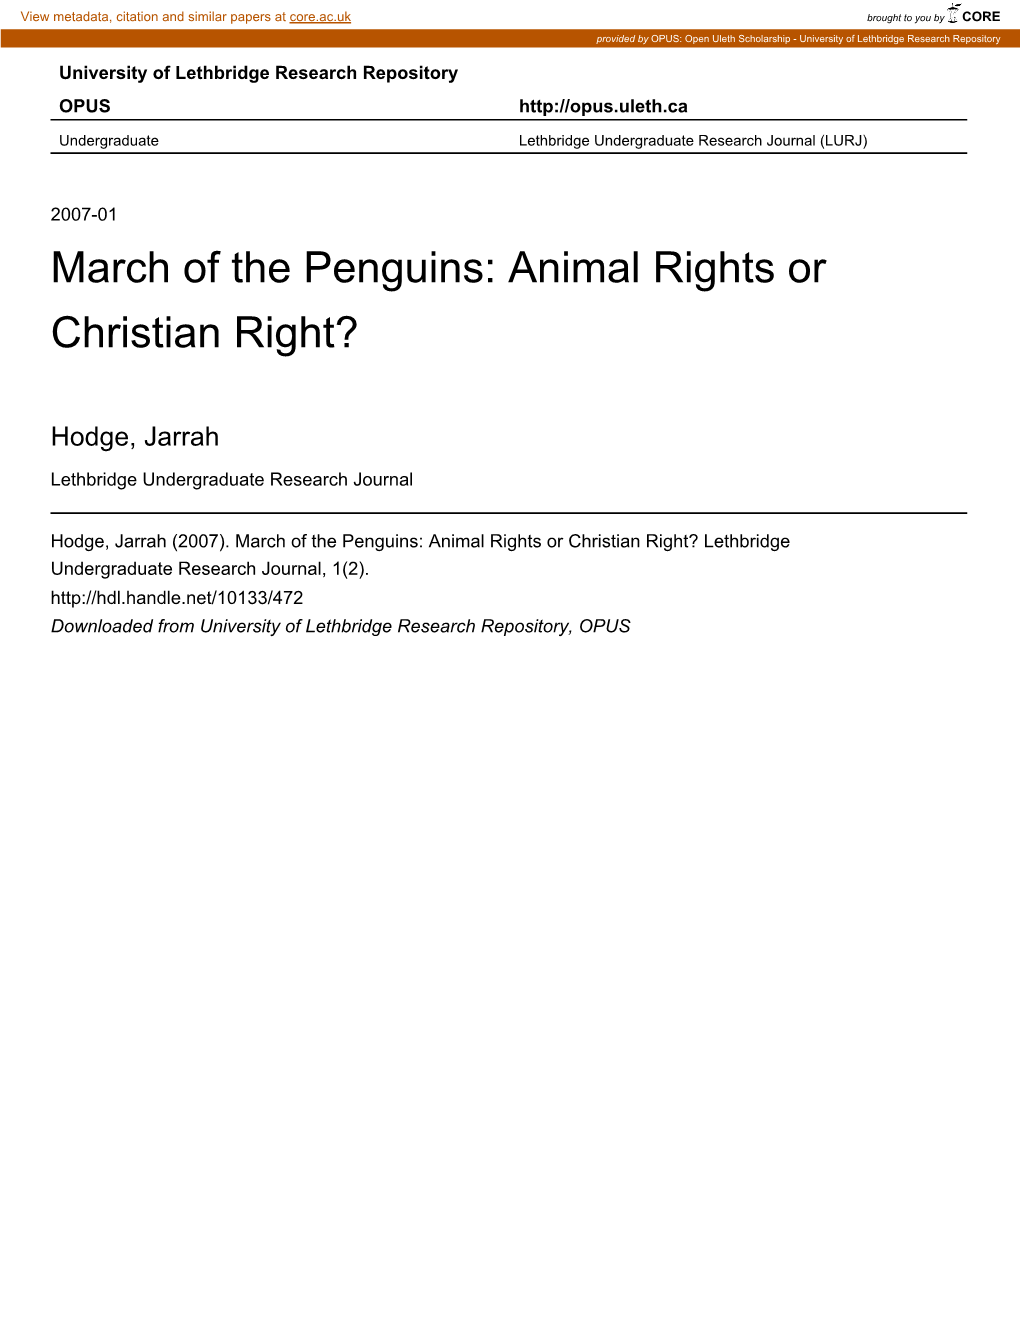 March of the Penguins: Animal Rights Or Christian Right?